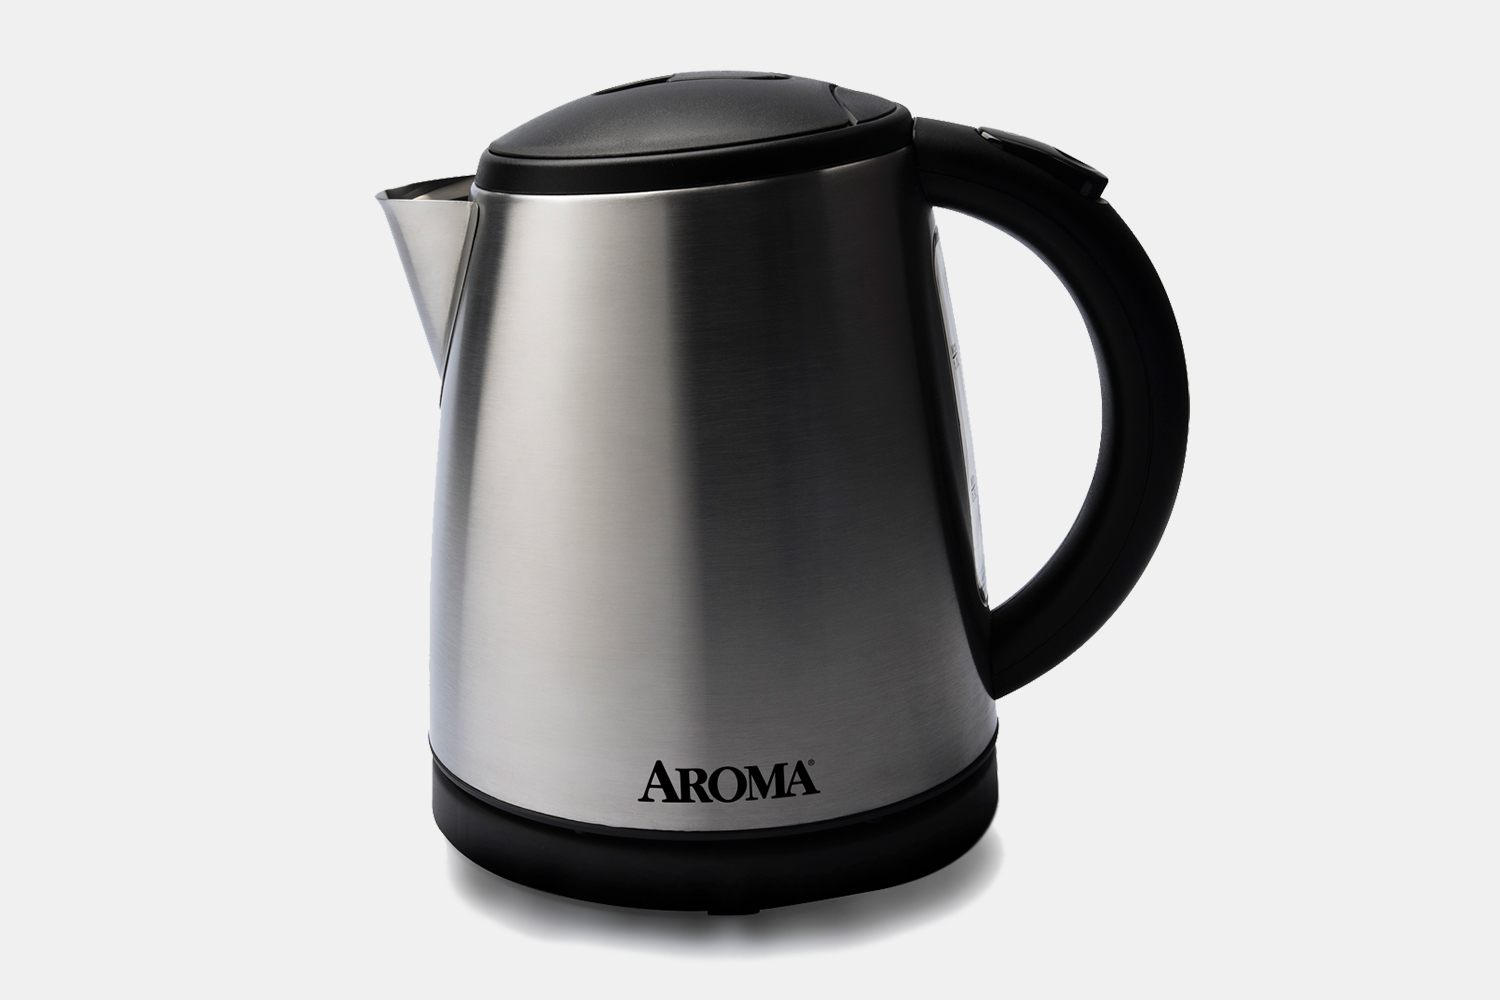 Aroma 1.7L Electric Kettle - Black in 2023